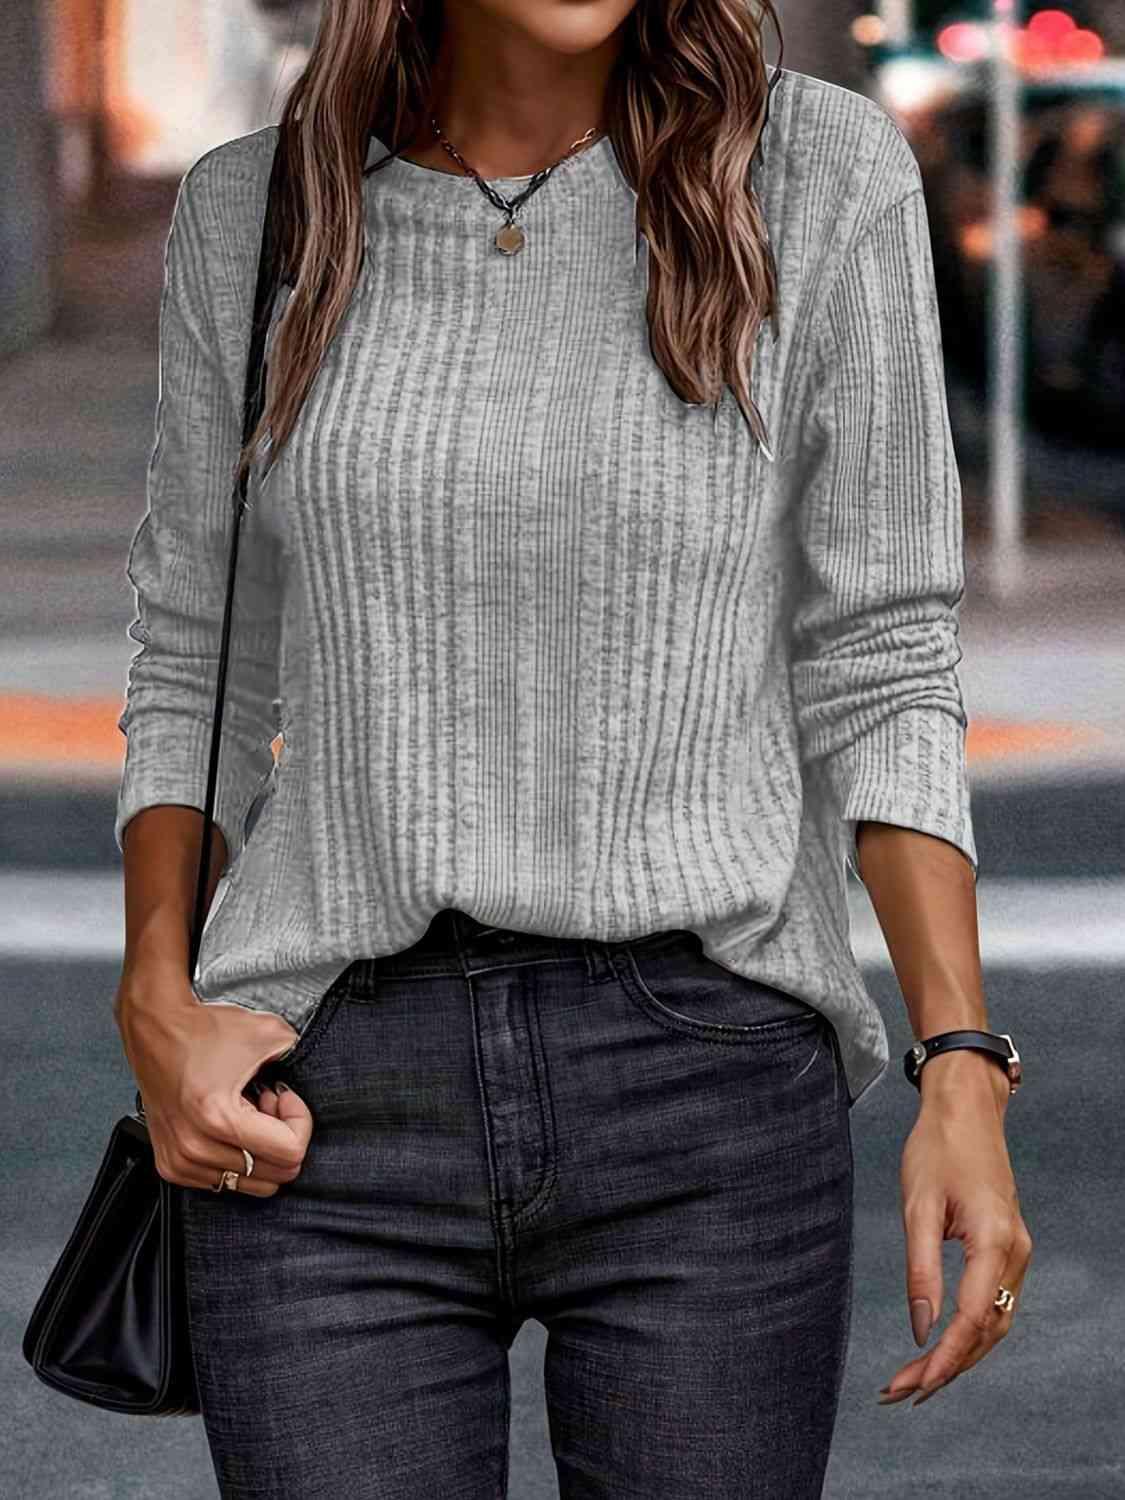 a woman wearing a gray sweater and black jeans